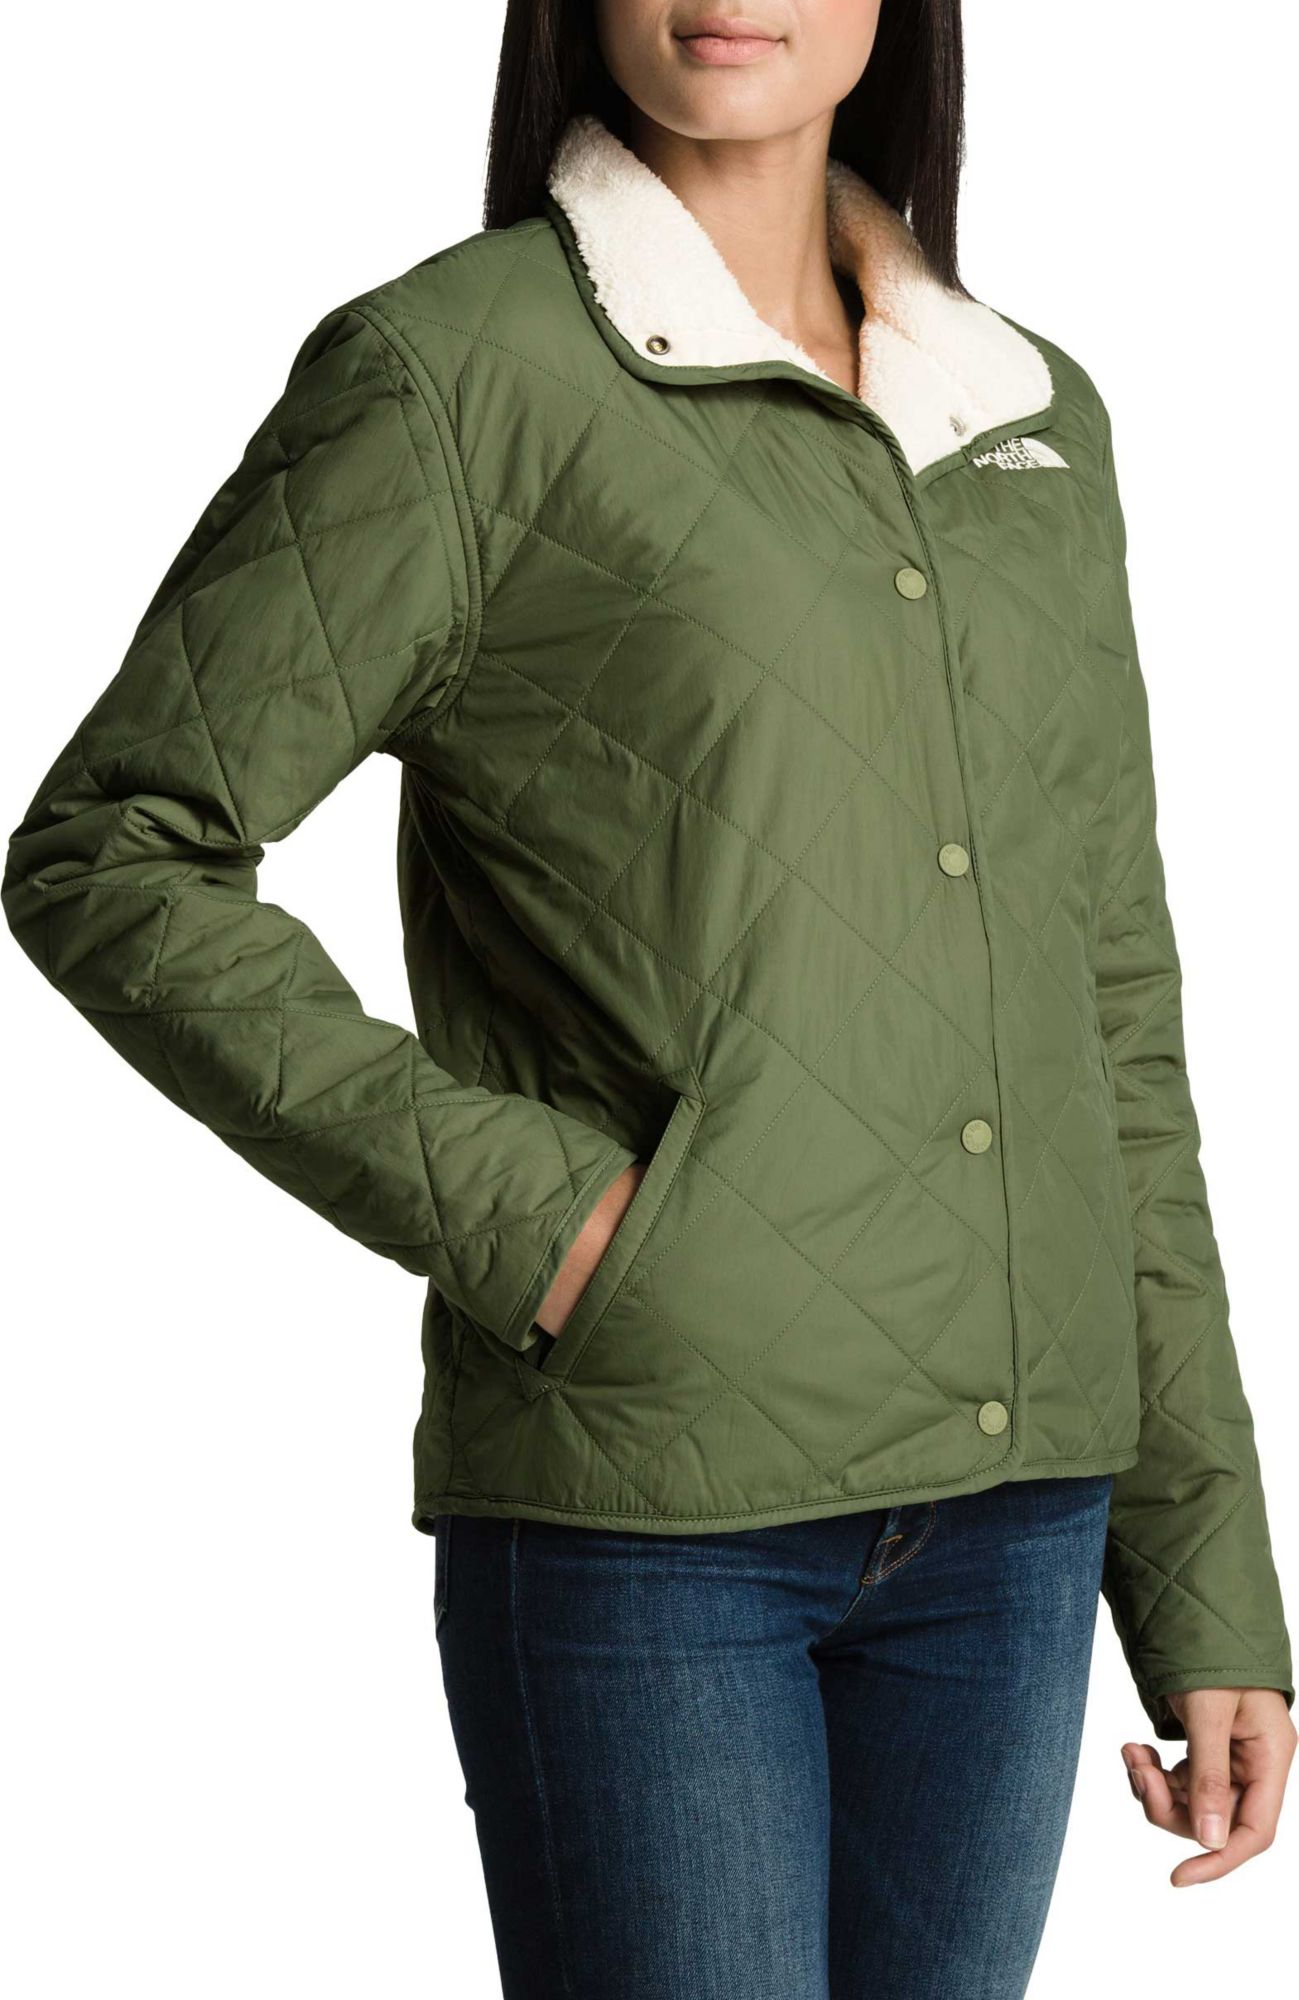 the north face women's rosie sherpa vest